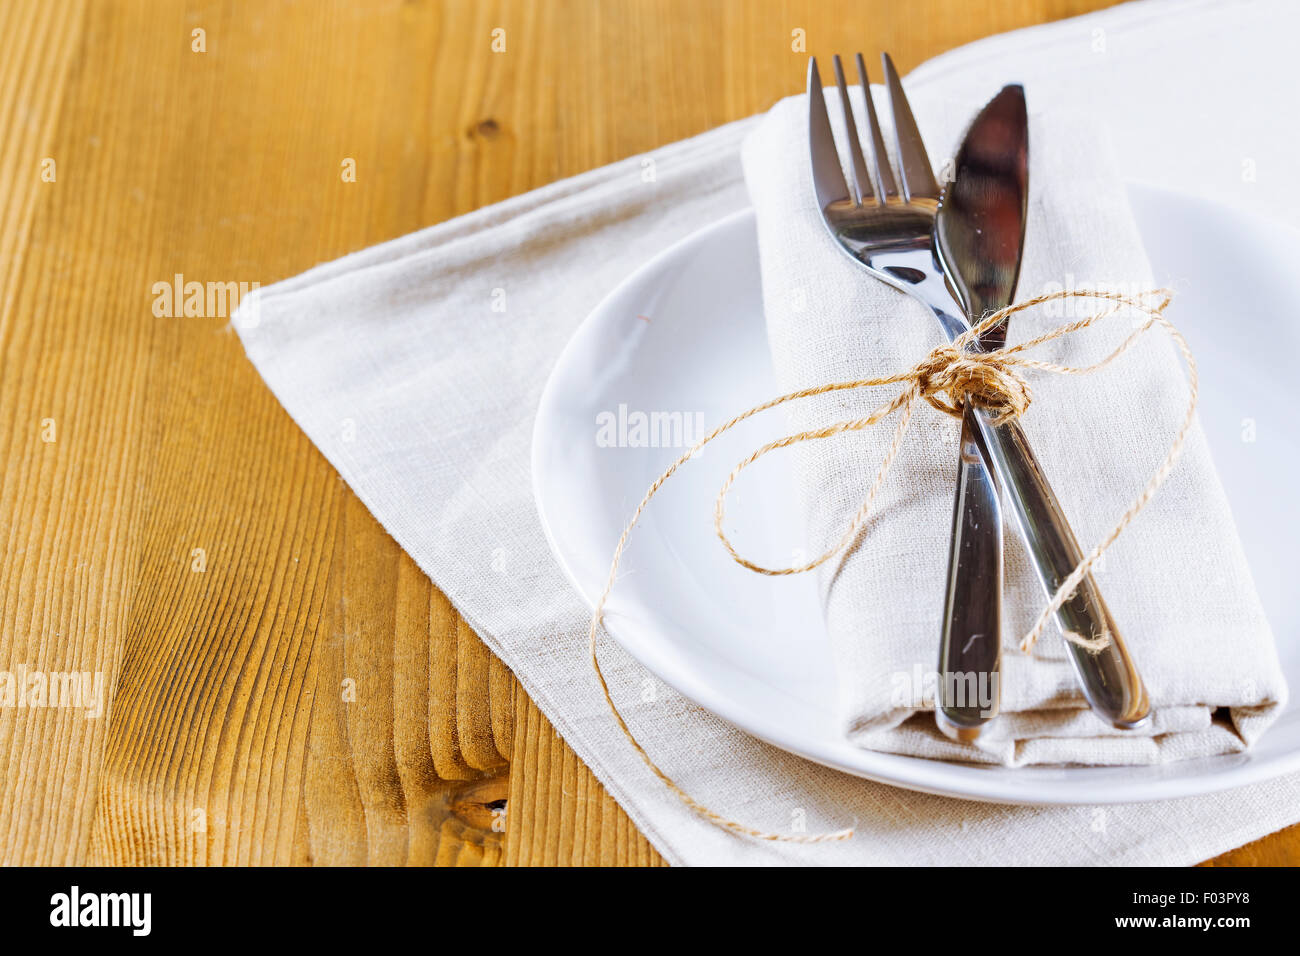 Autumn place setting. Knife and fork with white linen tied up with ...